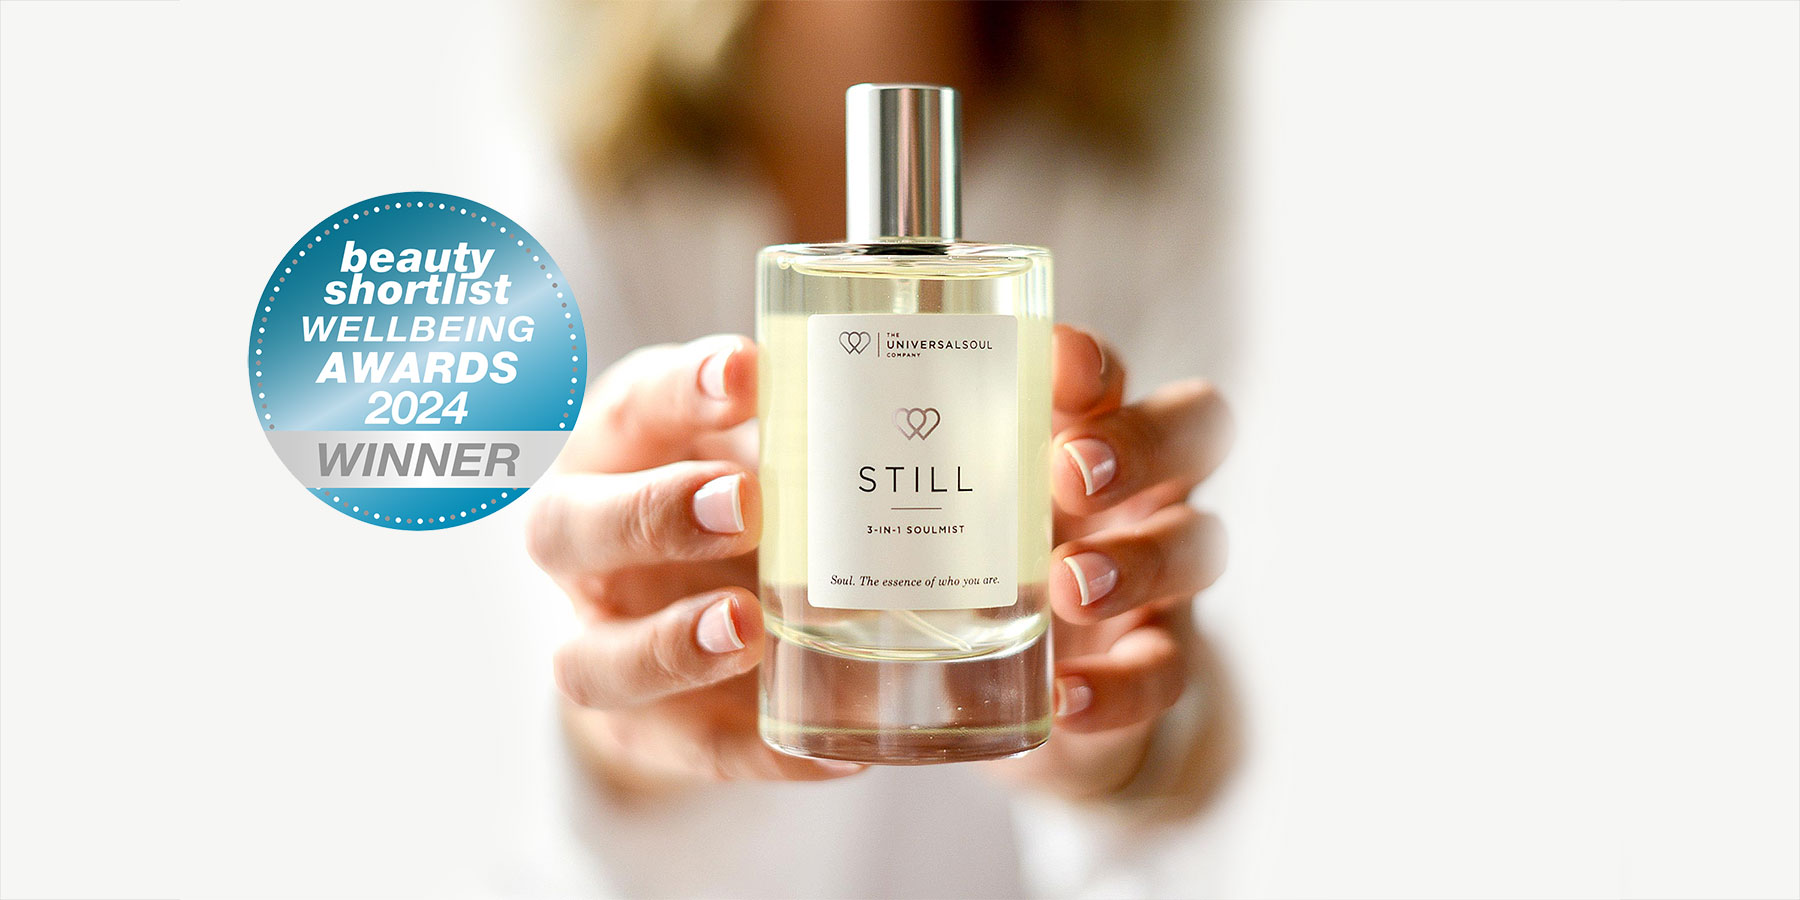 Our 3-in-1 Soul Mist ‘STILL’, wins ‘Best Pillow Mist’ 5 years in a row